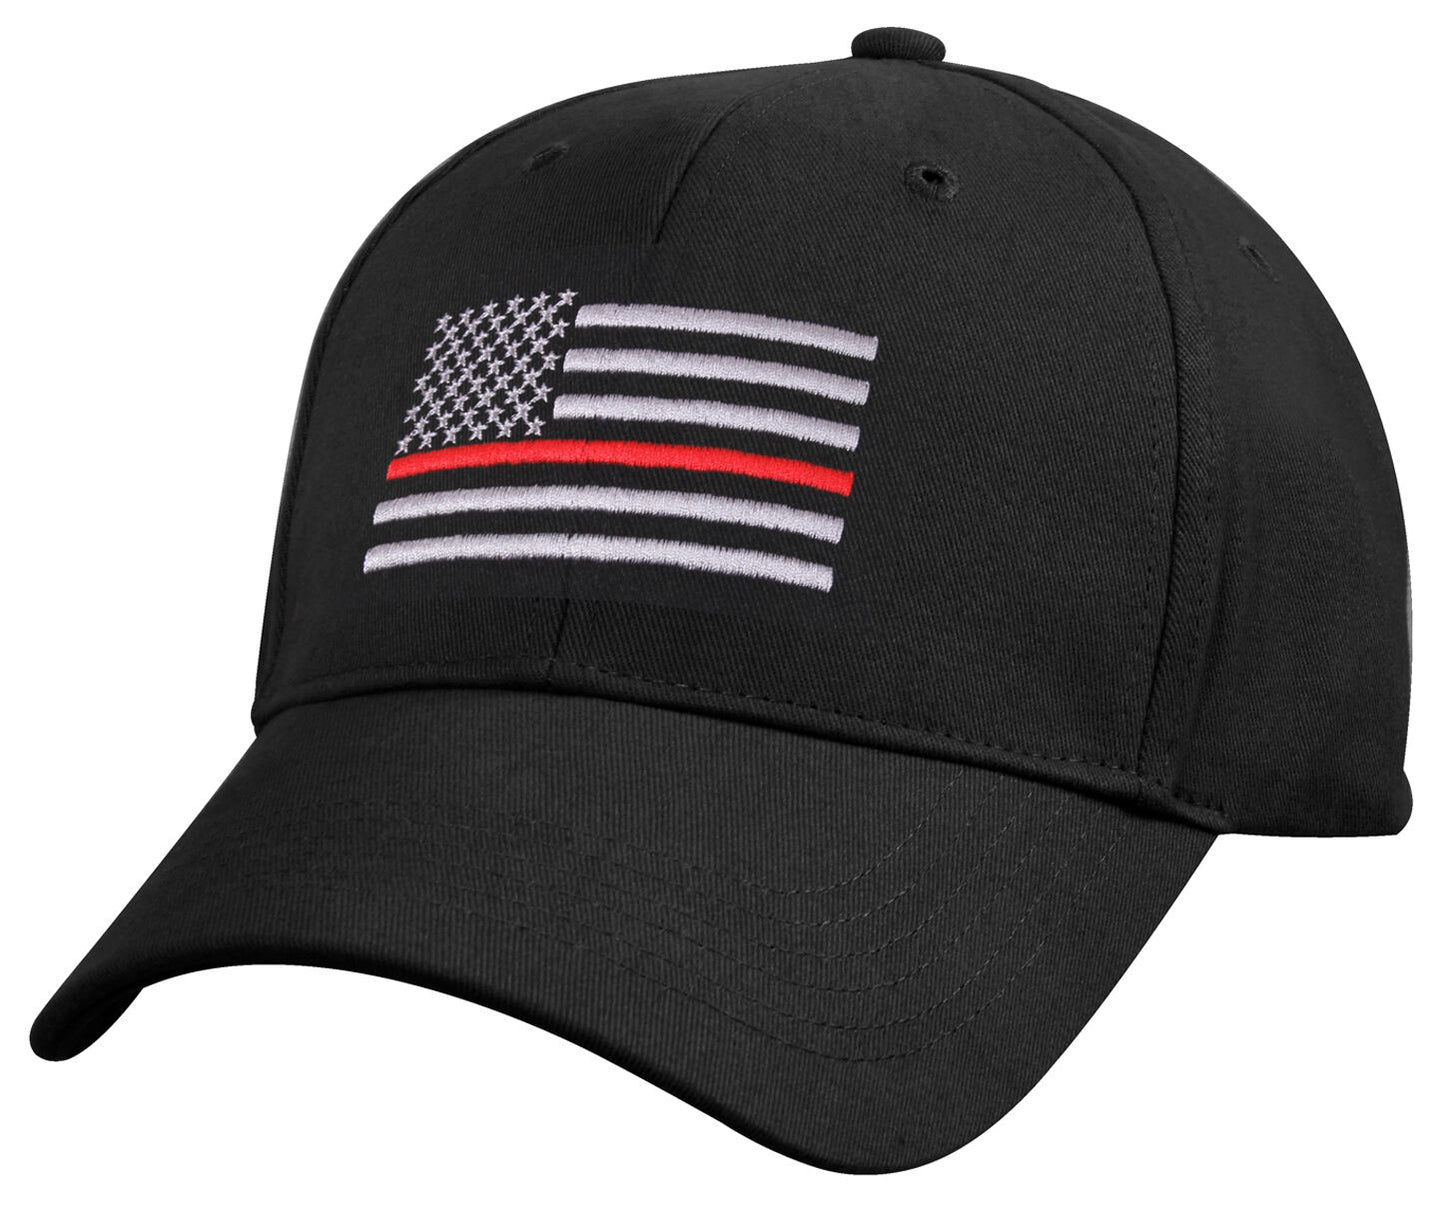 Rothco Thin Red Line Flag Low Profile Cap